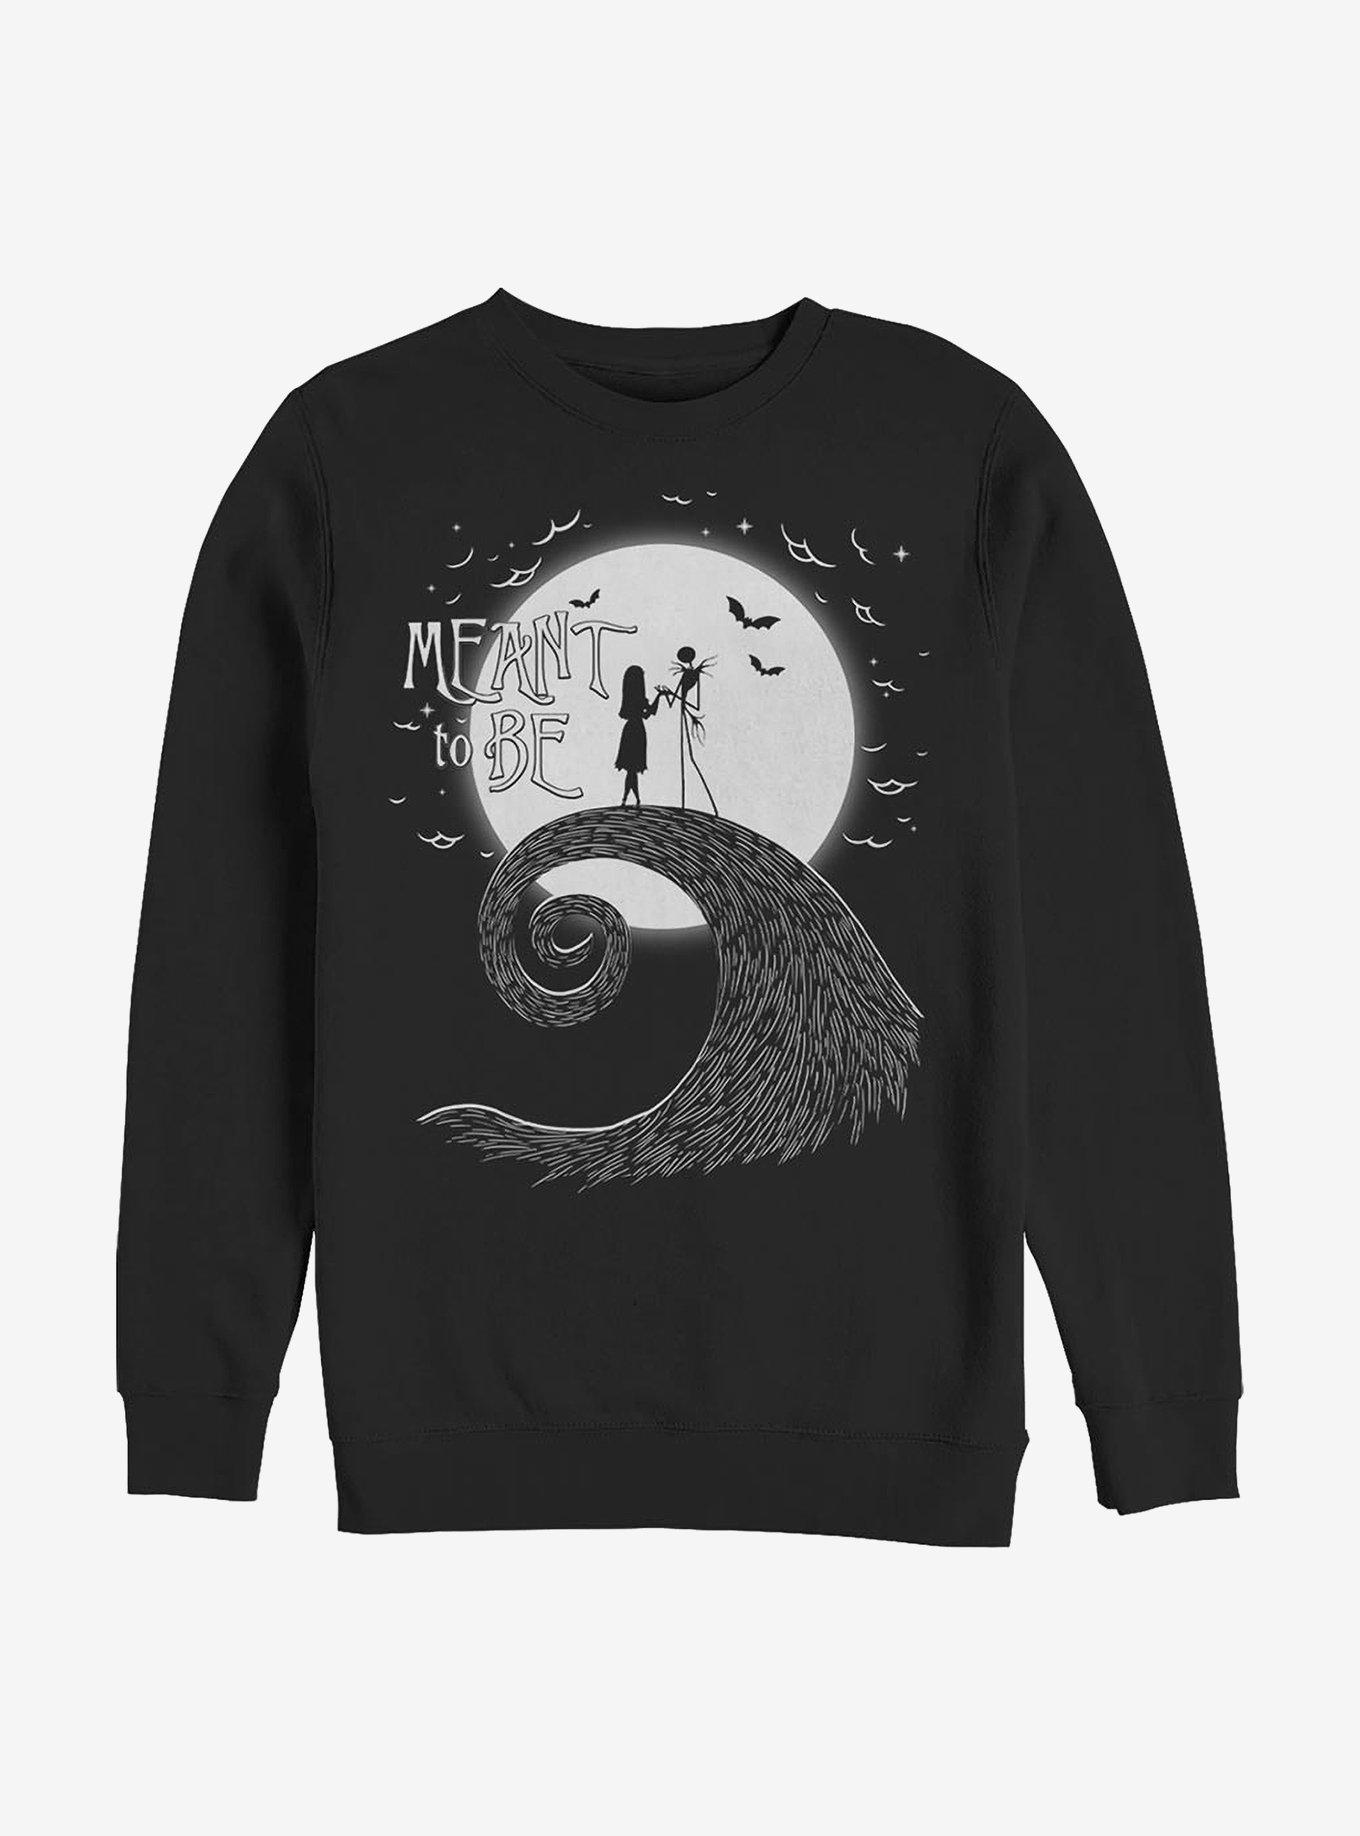 Disney Nightmare Before Christmas Meant To Be Sweatshirt - BLACK | BoxLunch